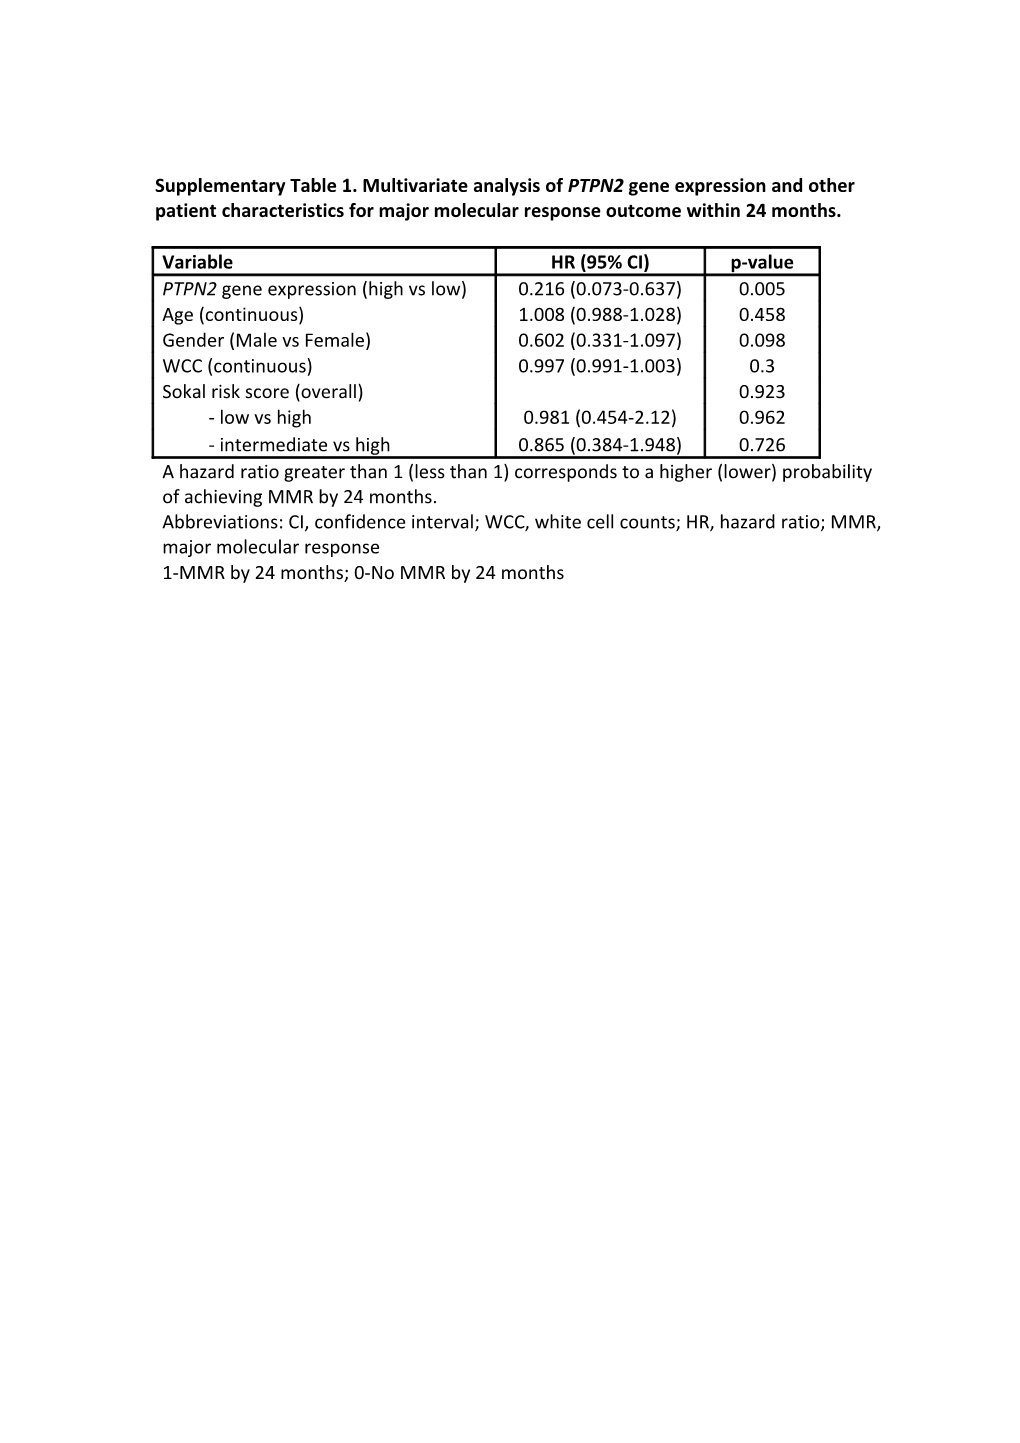 Supplementary Table 1. Multivariate Analysis of PTPN2 Gene Expression and Other Patient